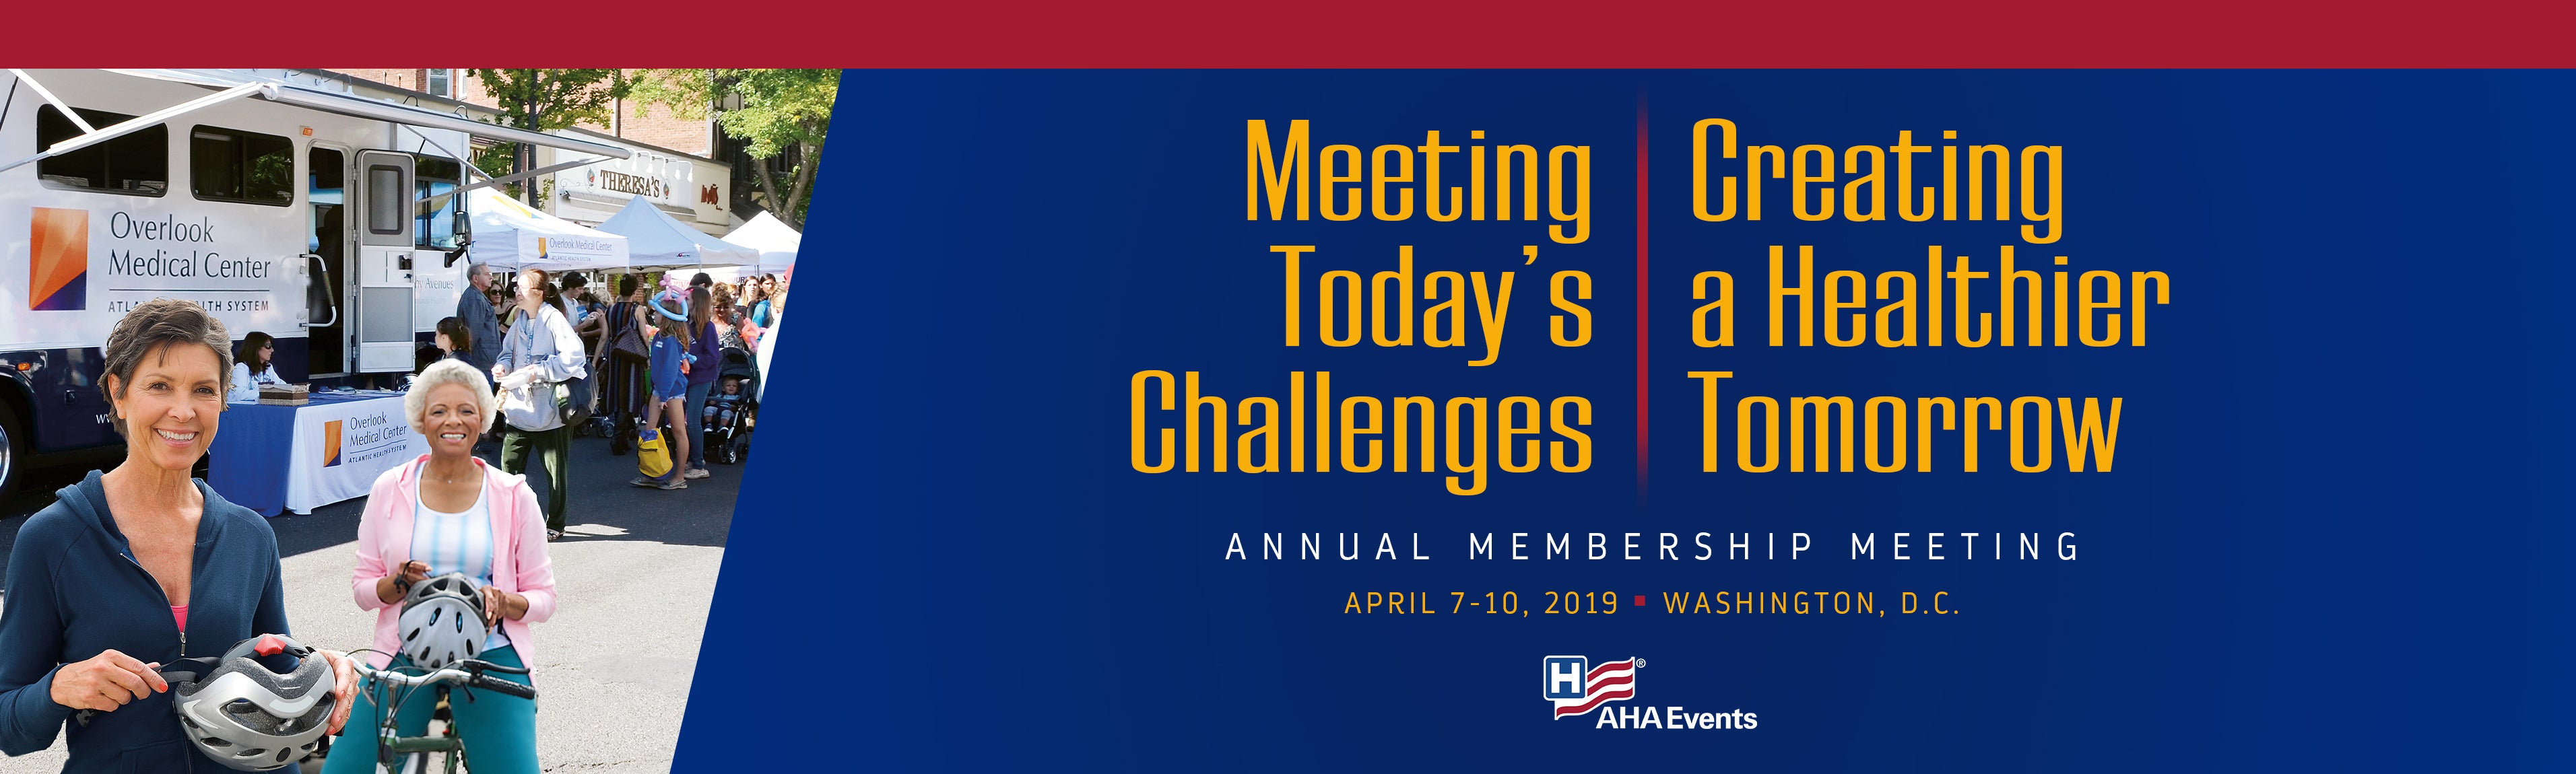 2019 Annual Meeting Schedule of Events | AHA